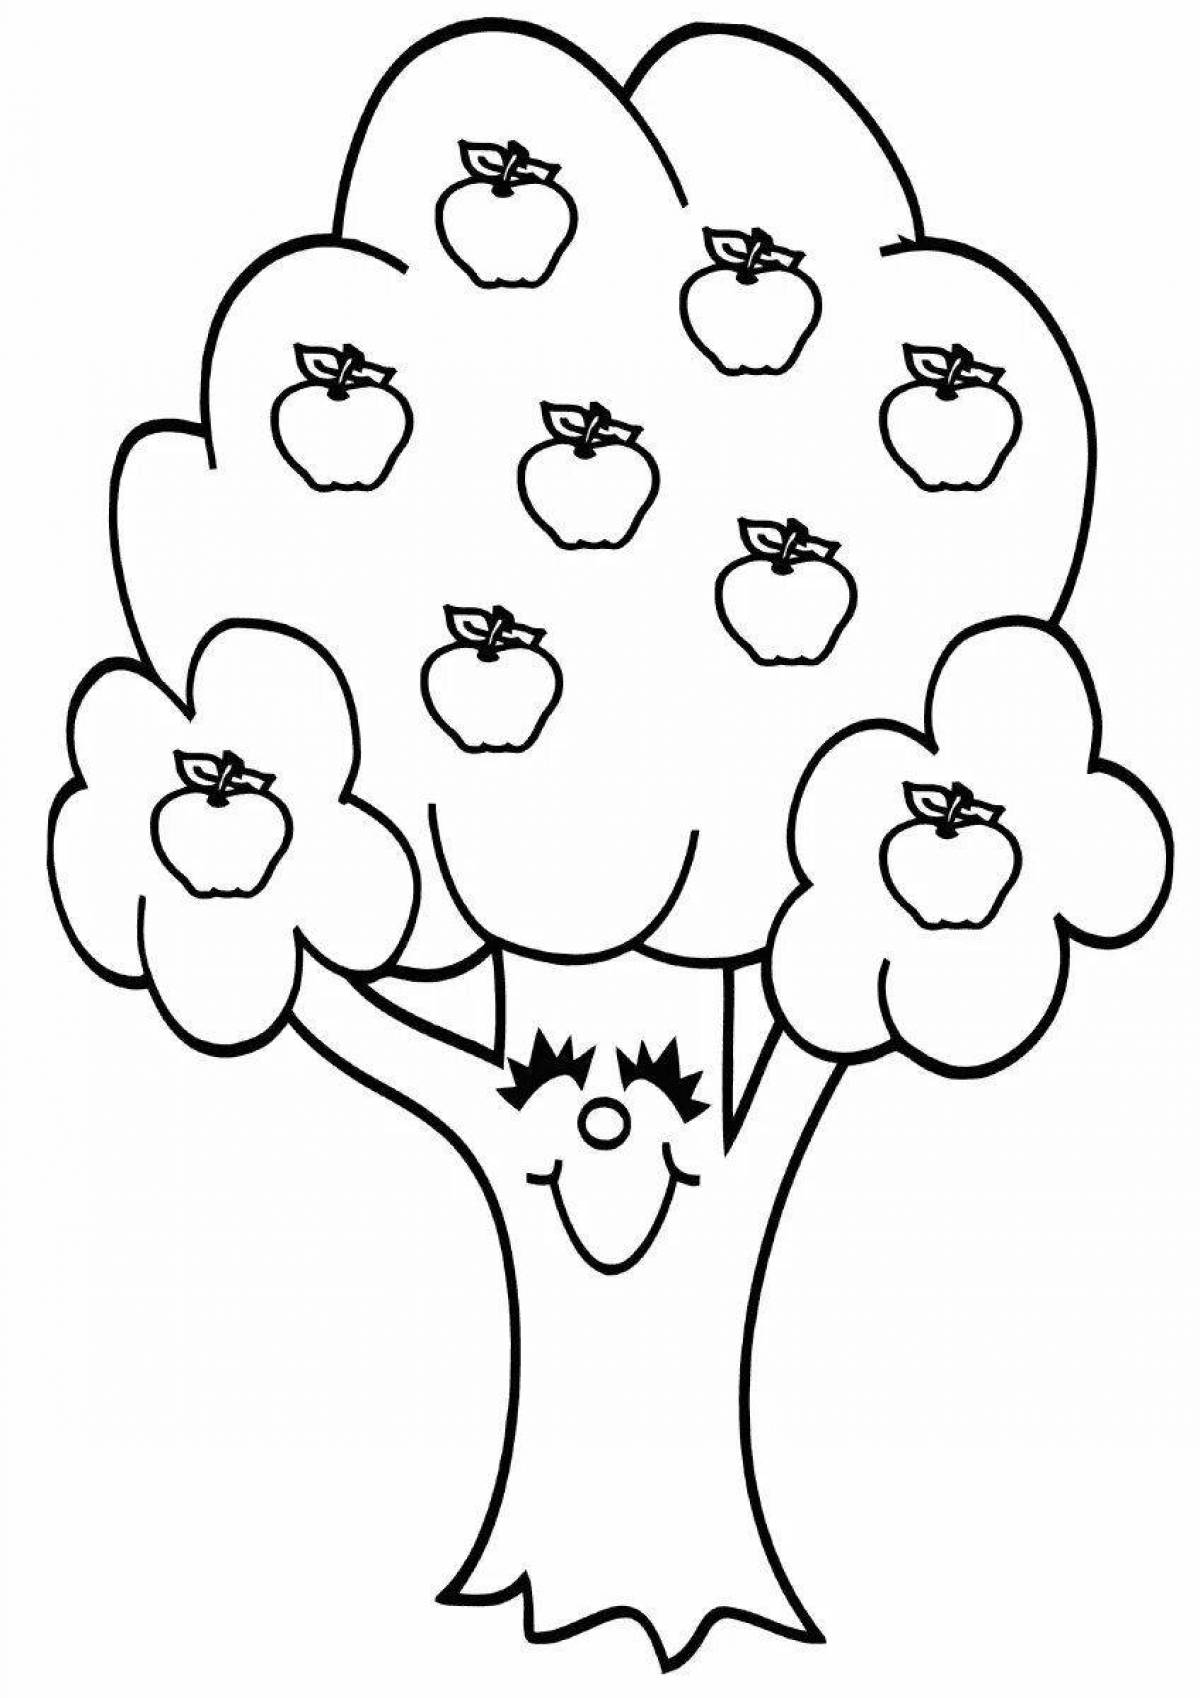 Colorful apple tree for kids